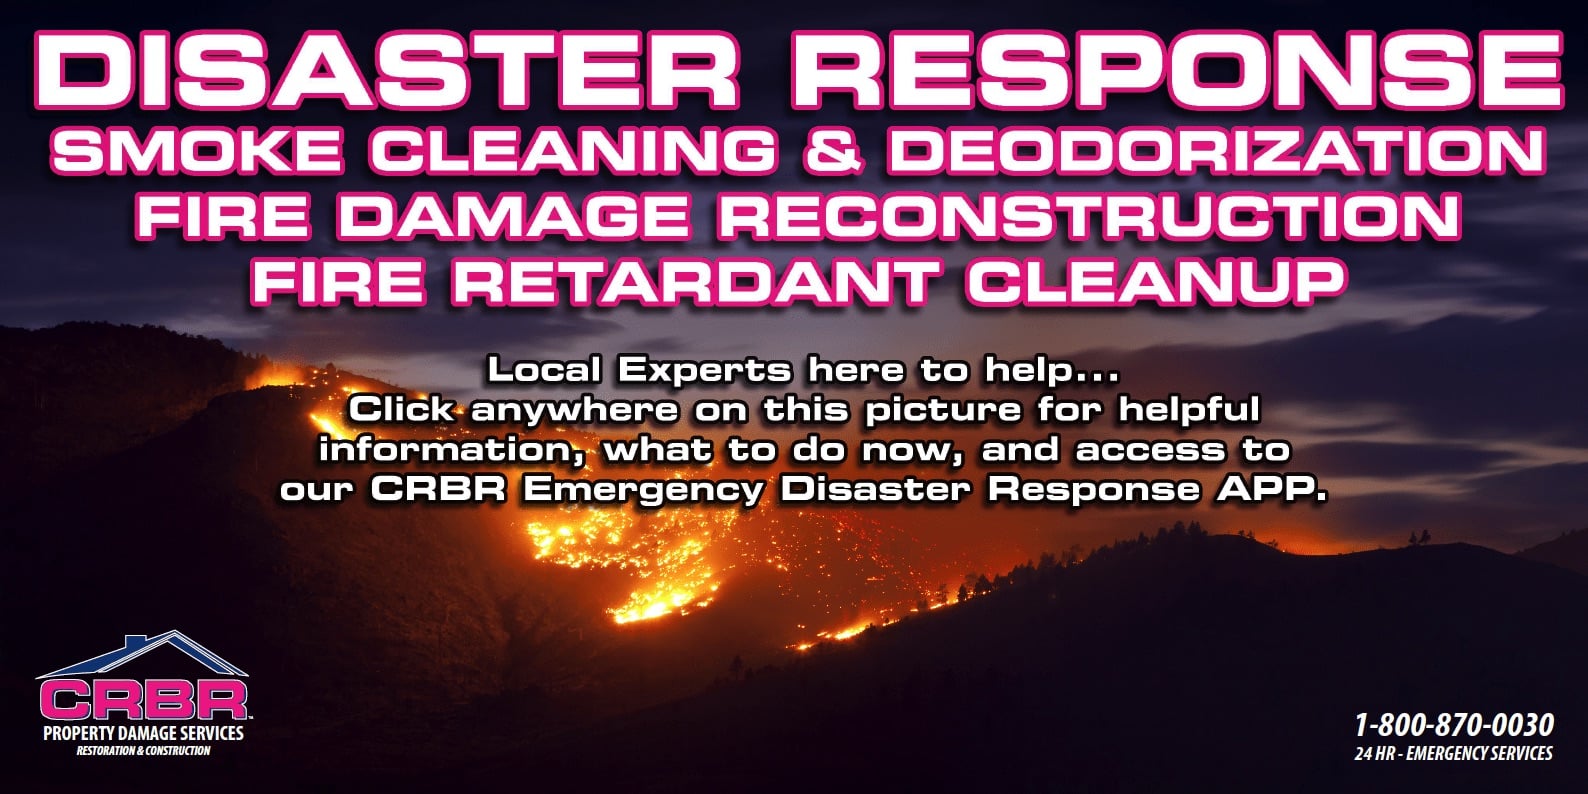 Showing Dixie fires with text that says, `DISASTER RESPONSE Smoke cleaning & deodorization, fire damage reconstruction, fire retardant cleanup. Local Experts here to help... Click anywhere on this picture for helpful information, what to do now, and access to our CRBR Emergency Disaster Response APP. 1-800-870-0030 24 hour emergency services.`